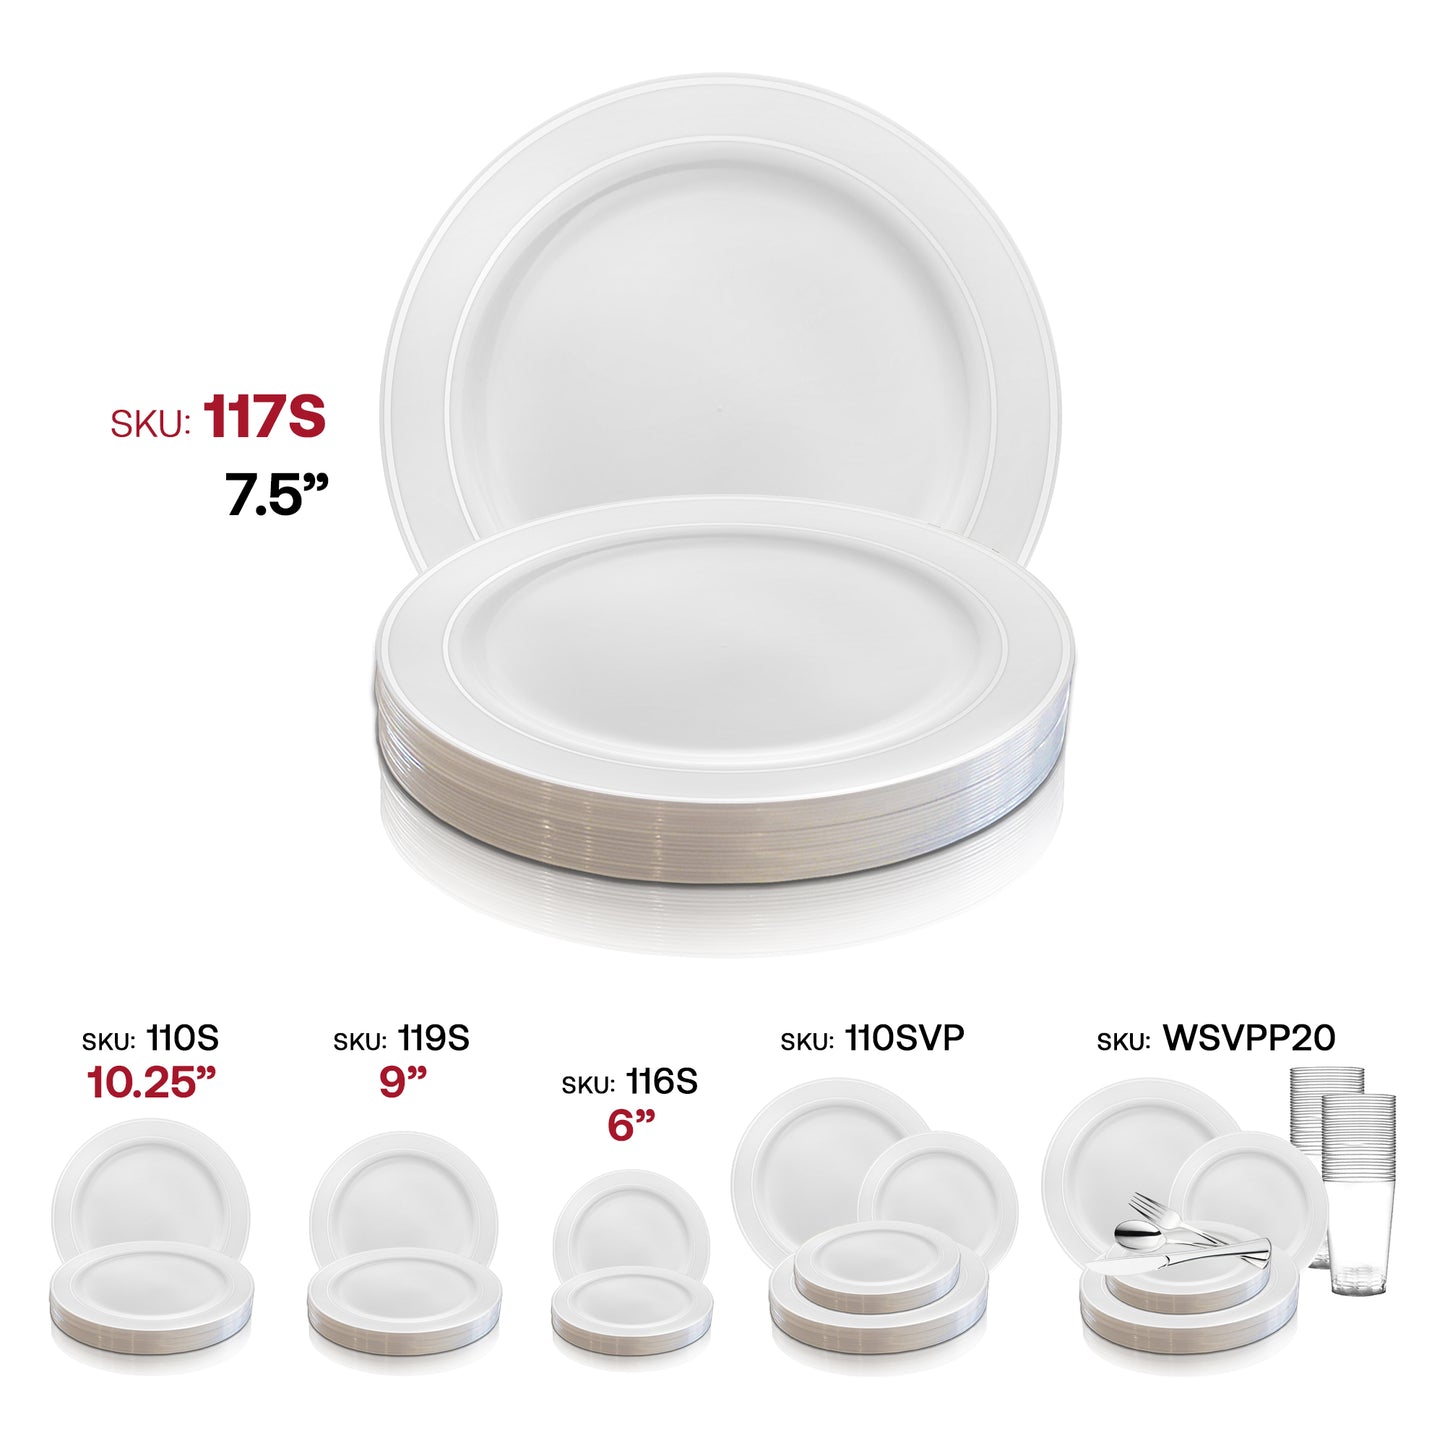 White with Silver Edge Rim Plastic Appetizer/Salad Plates (7.5") SKU | The Kaya Collection